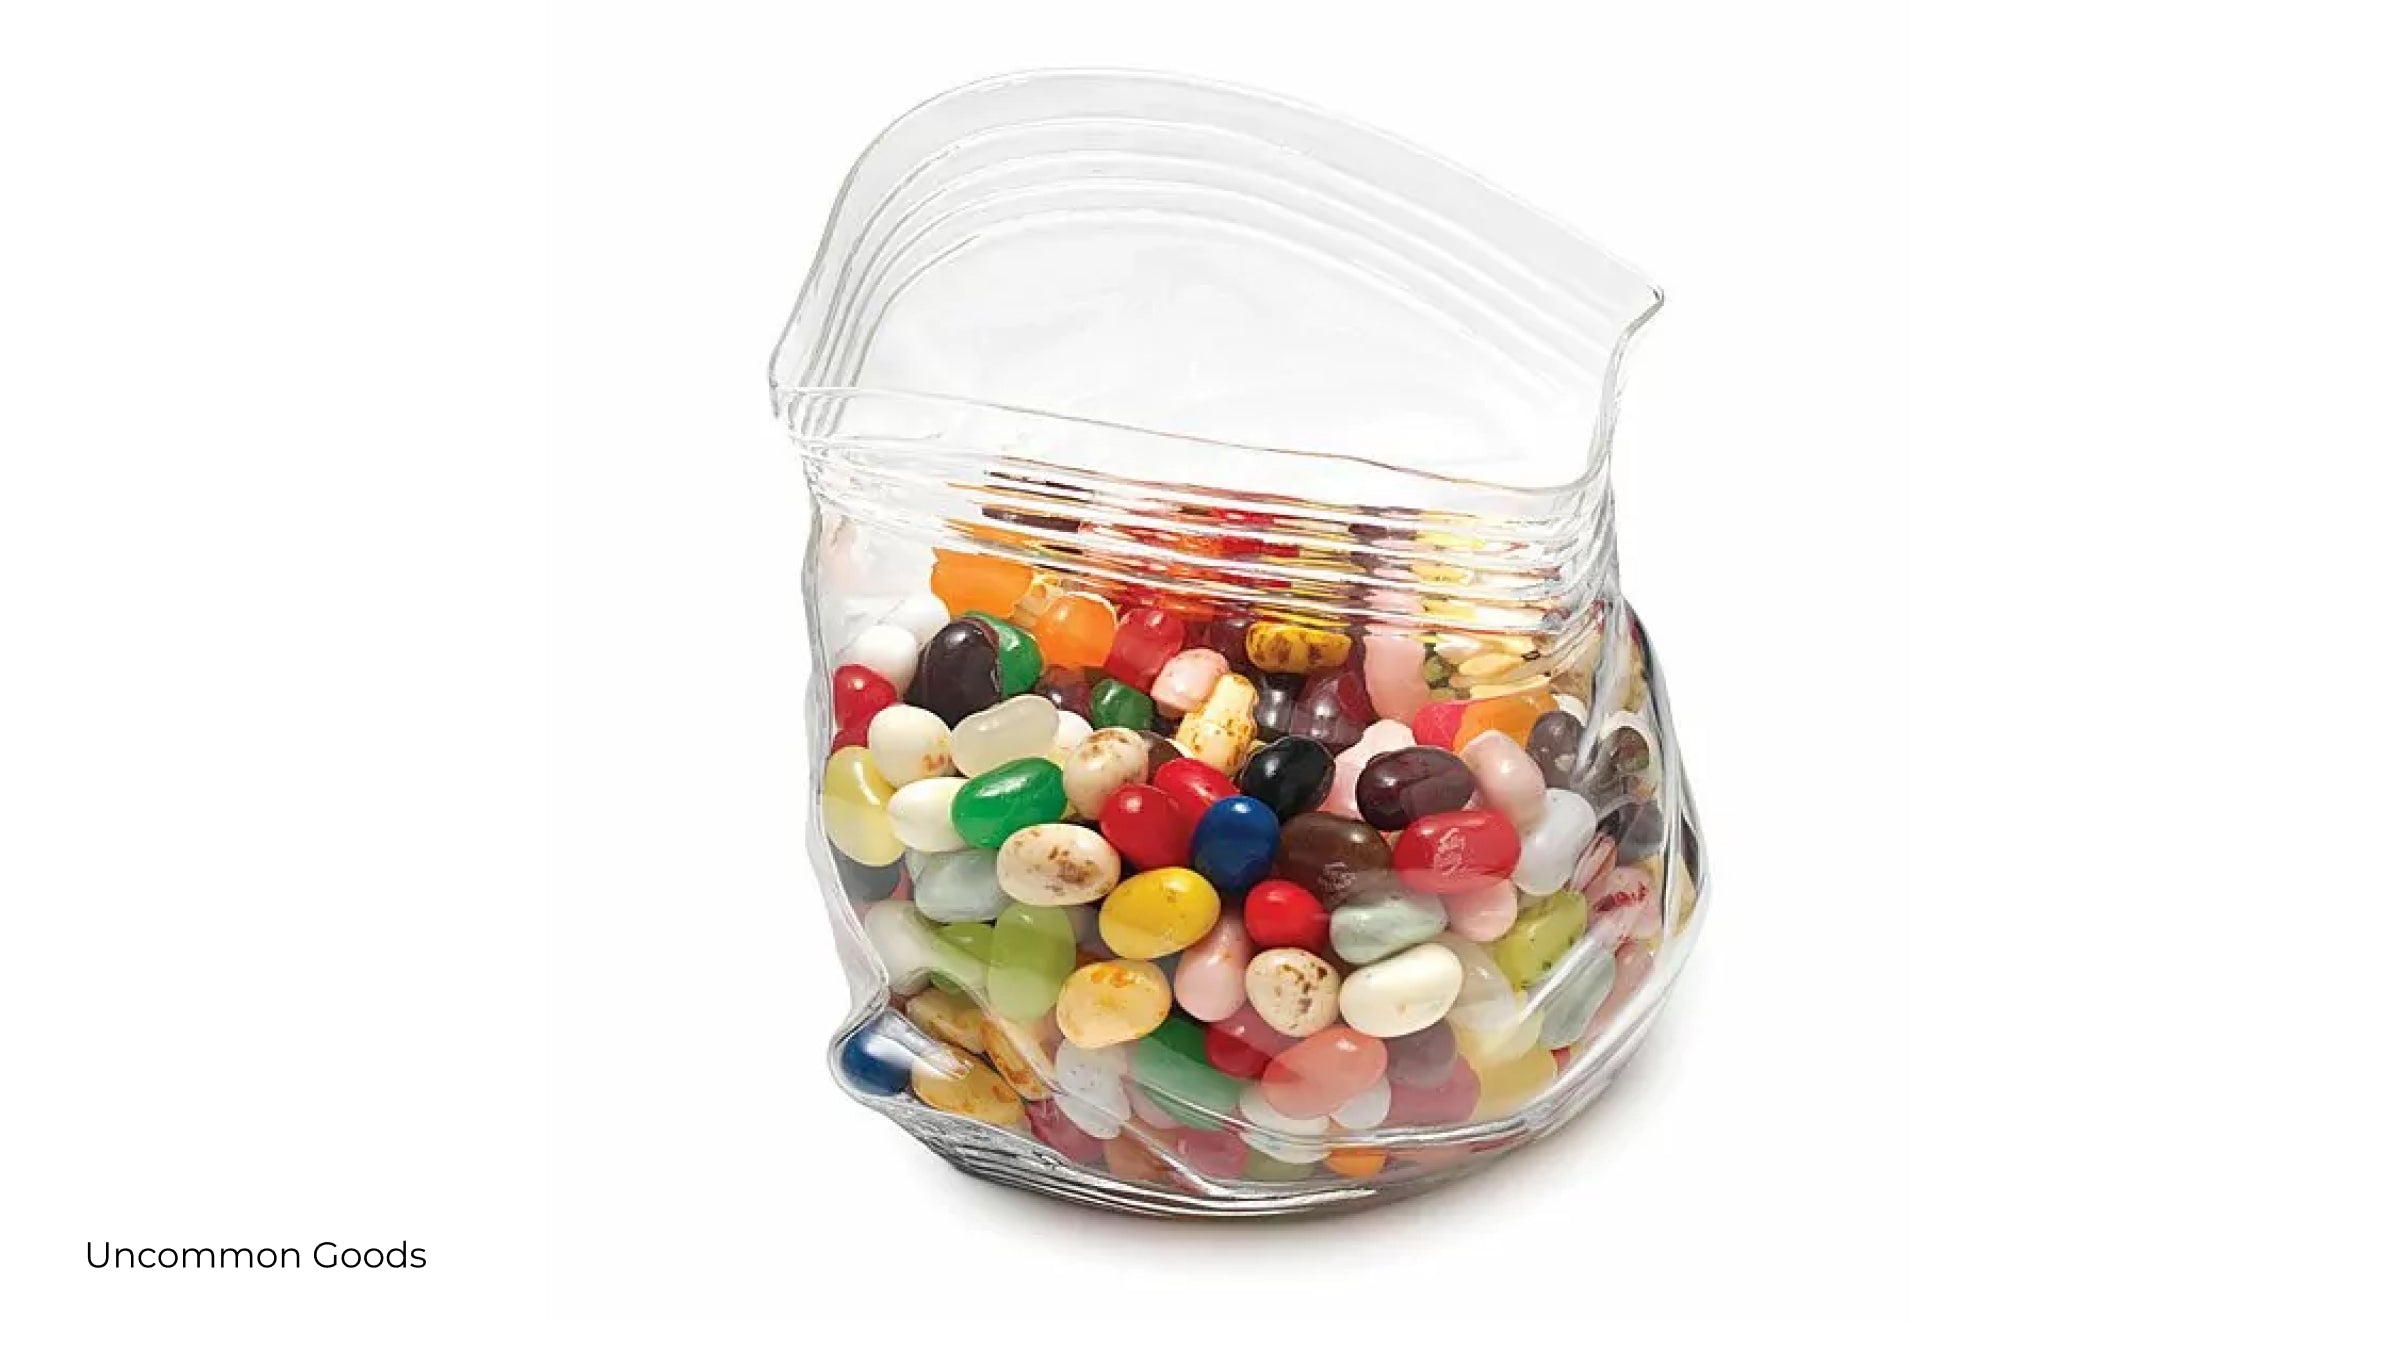 Unzipped glass zipper bag candy dish filled with jelly beans from Uncommon Goods